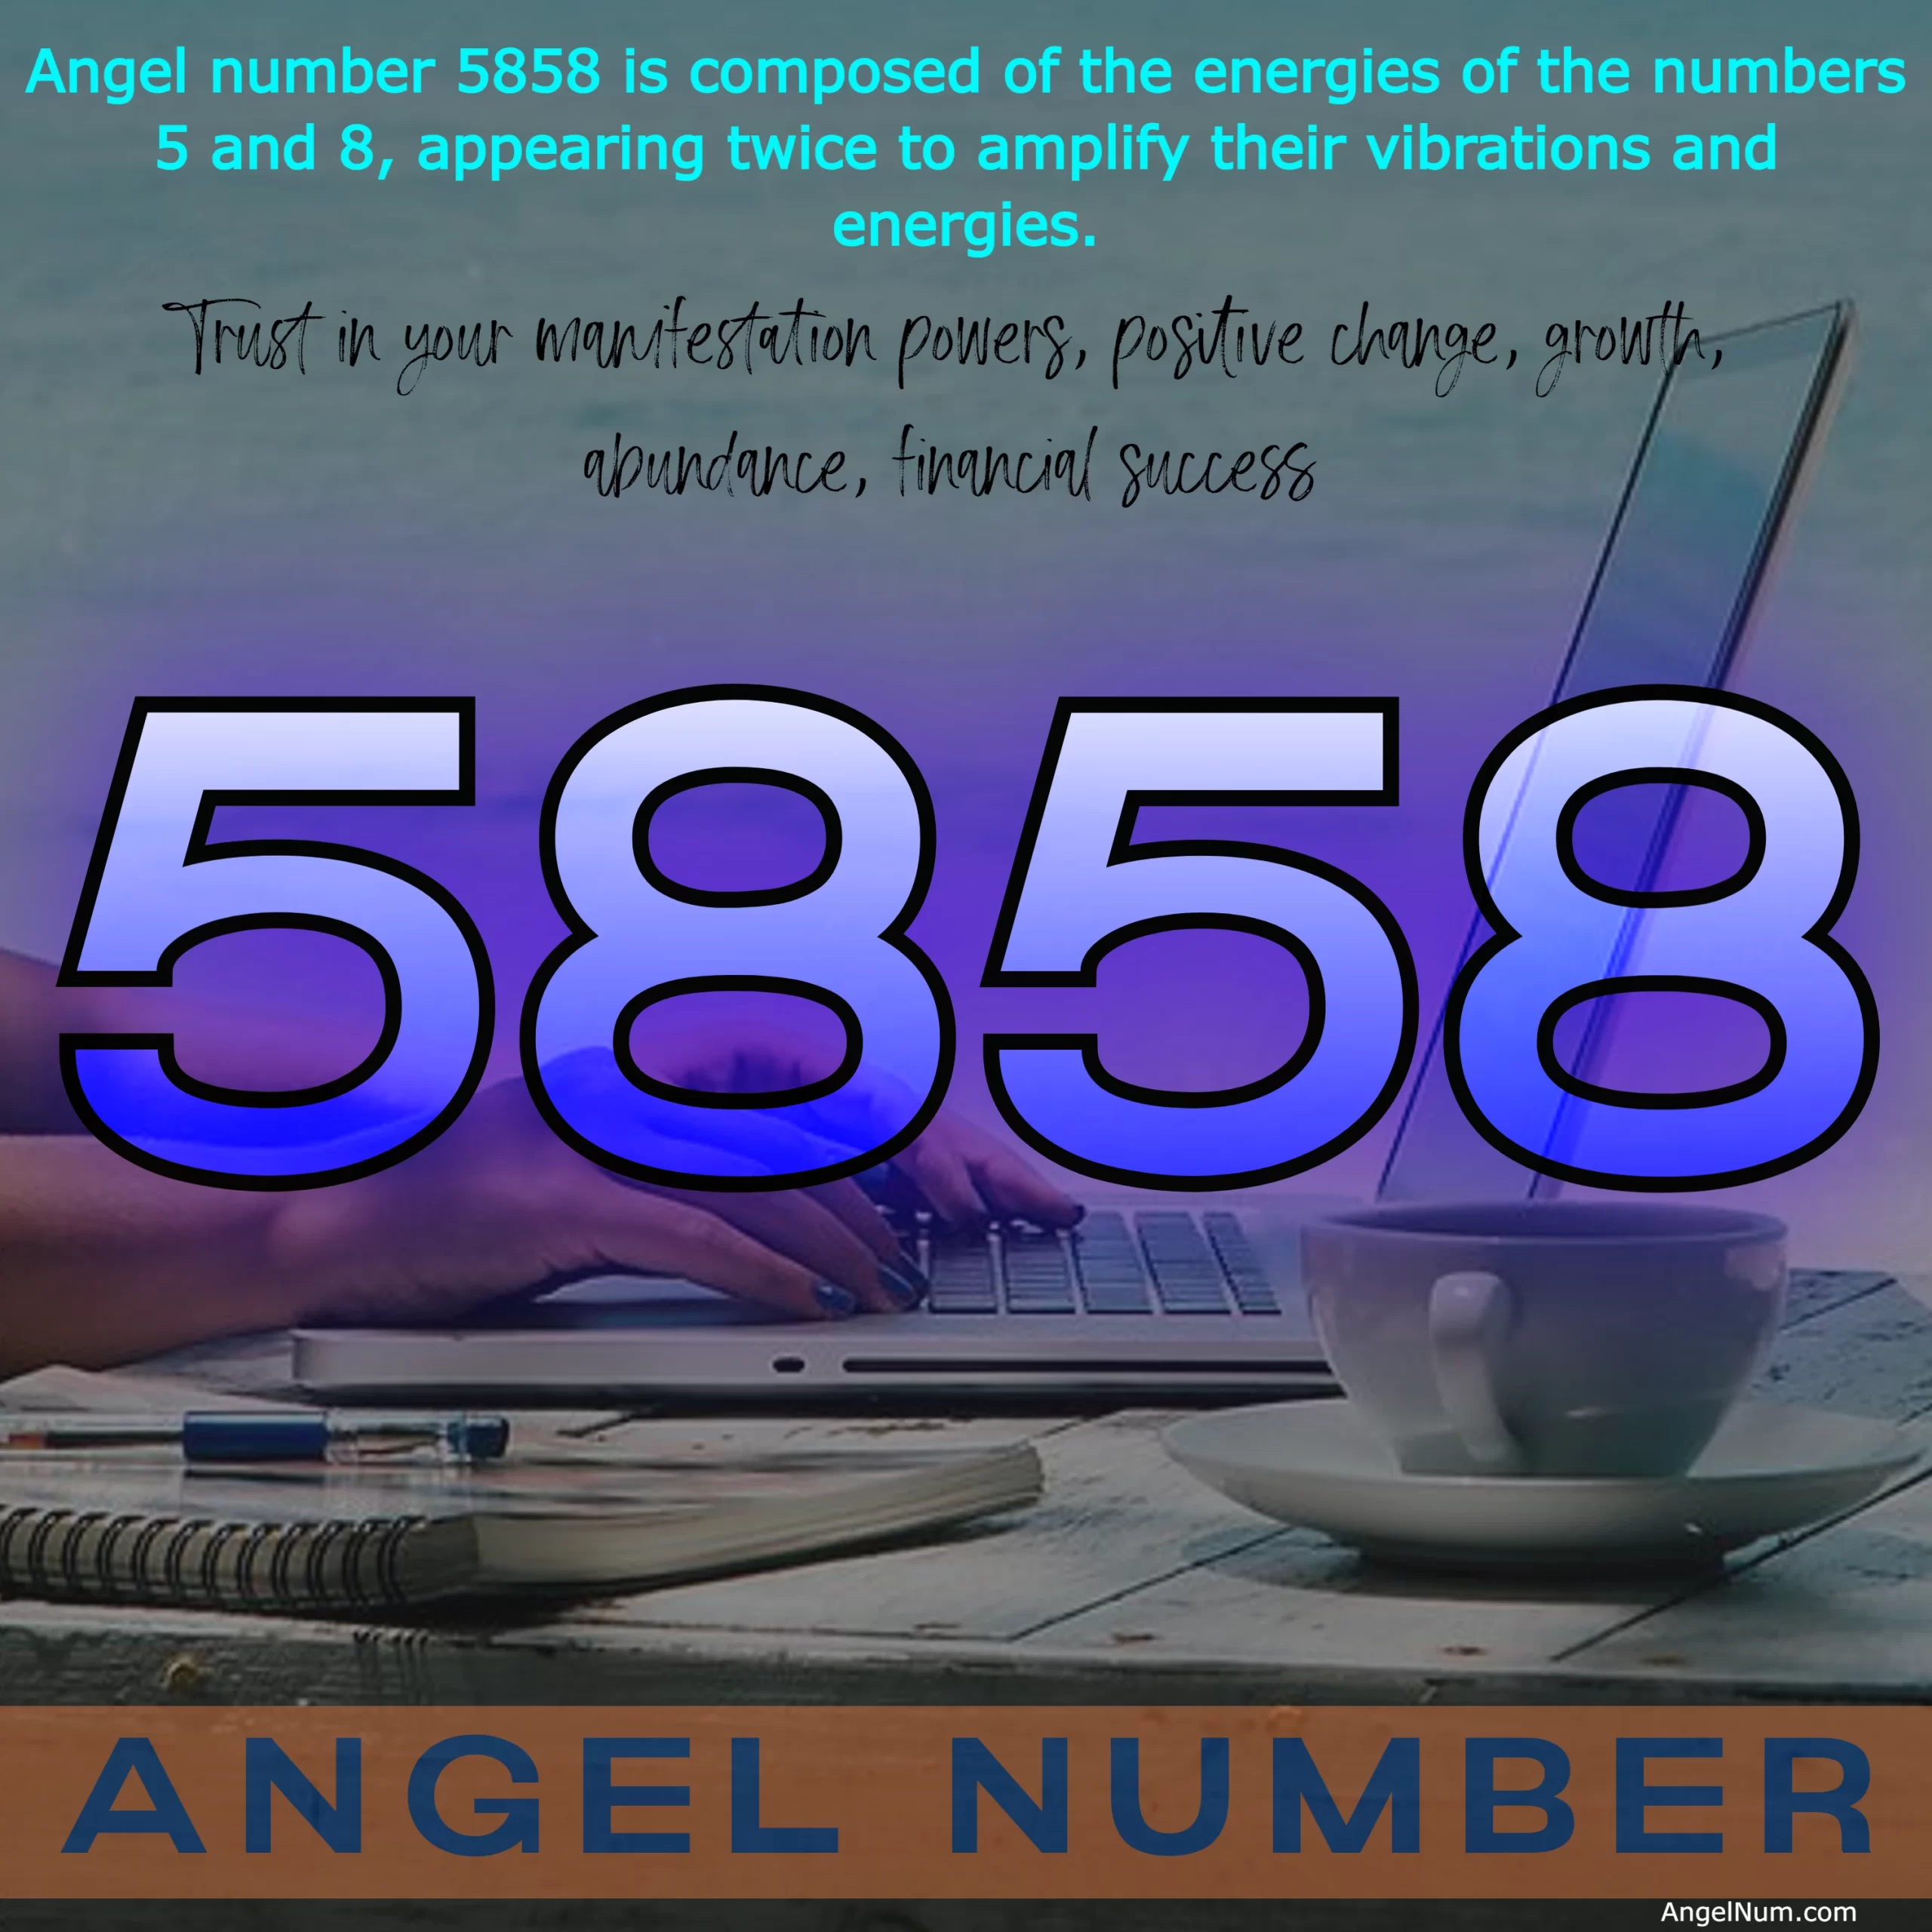 Angel Number 5858: Trust in Your Manifestation Powers